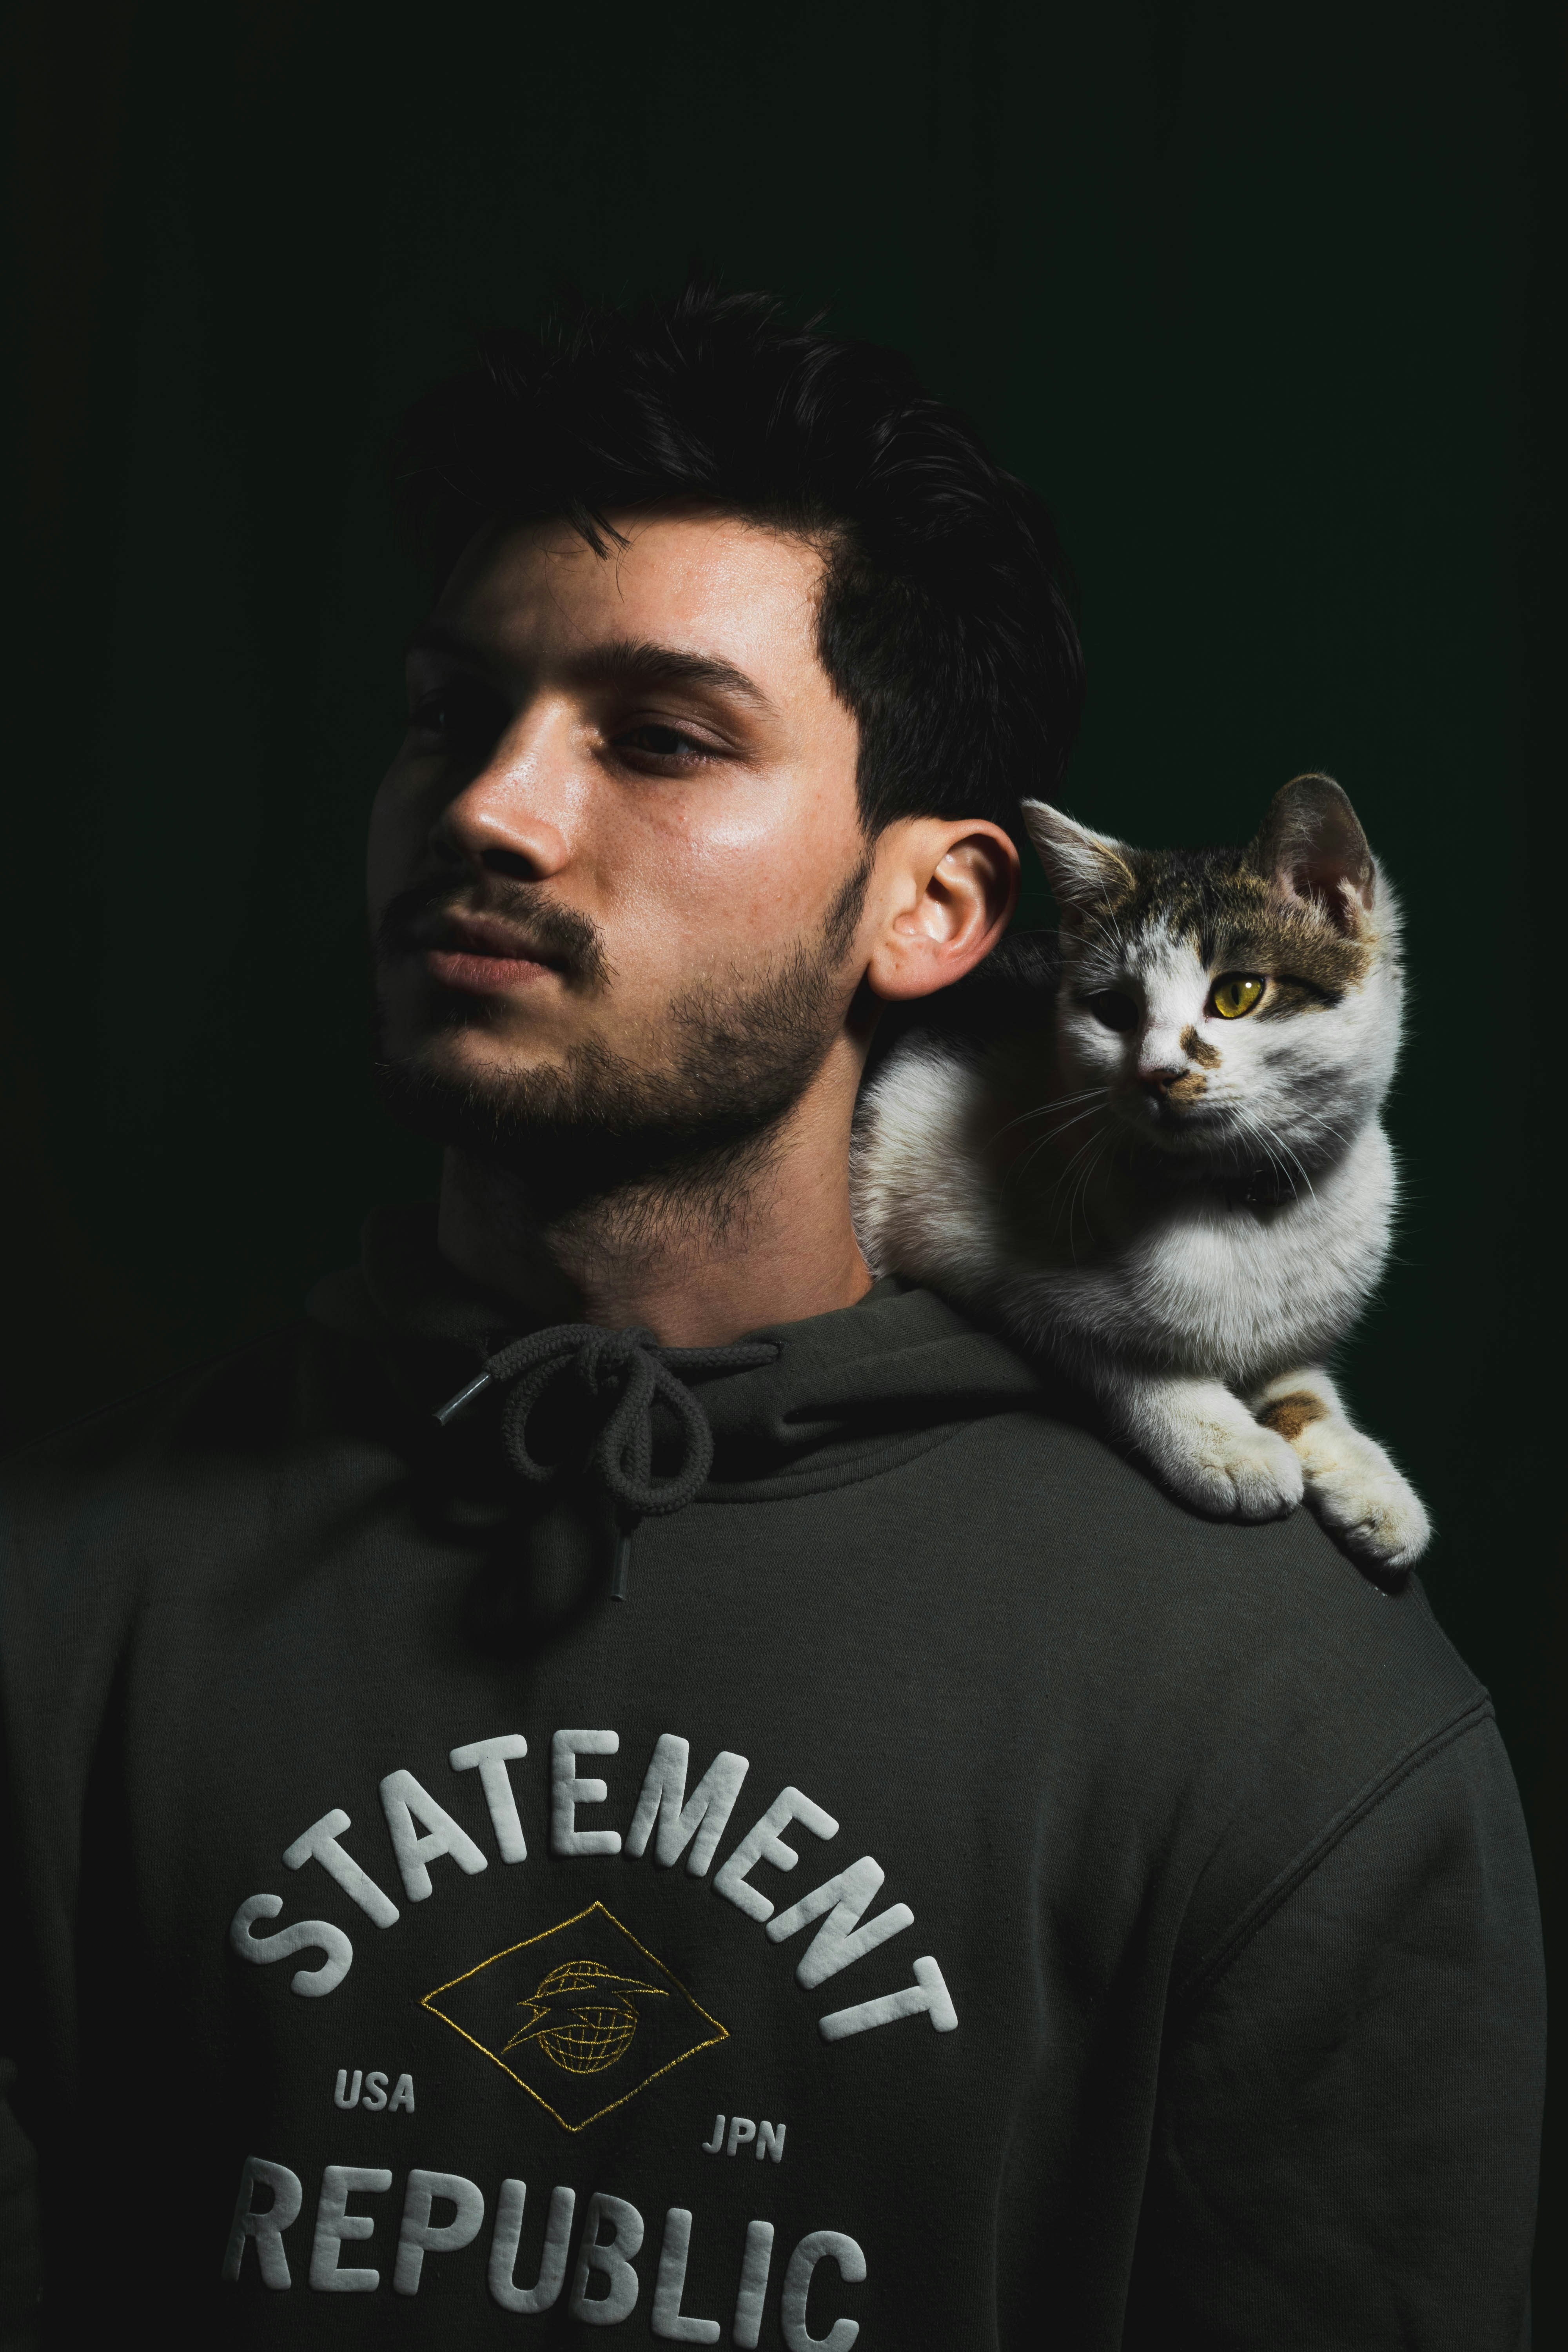 man in black and white crew neck shirt holding white and brown cat